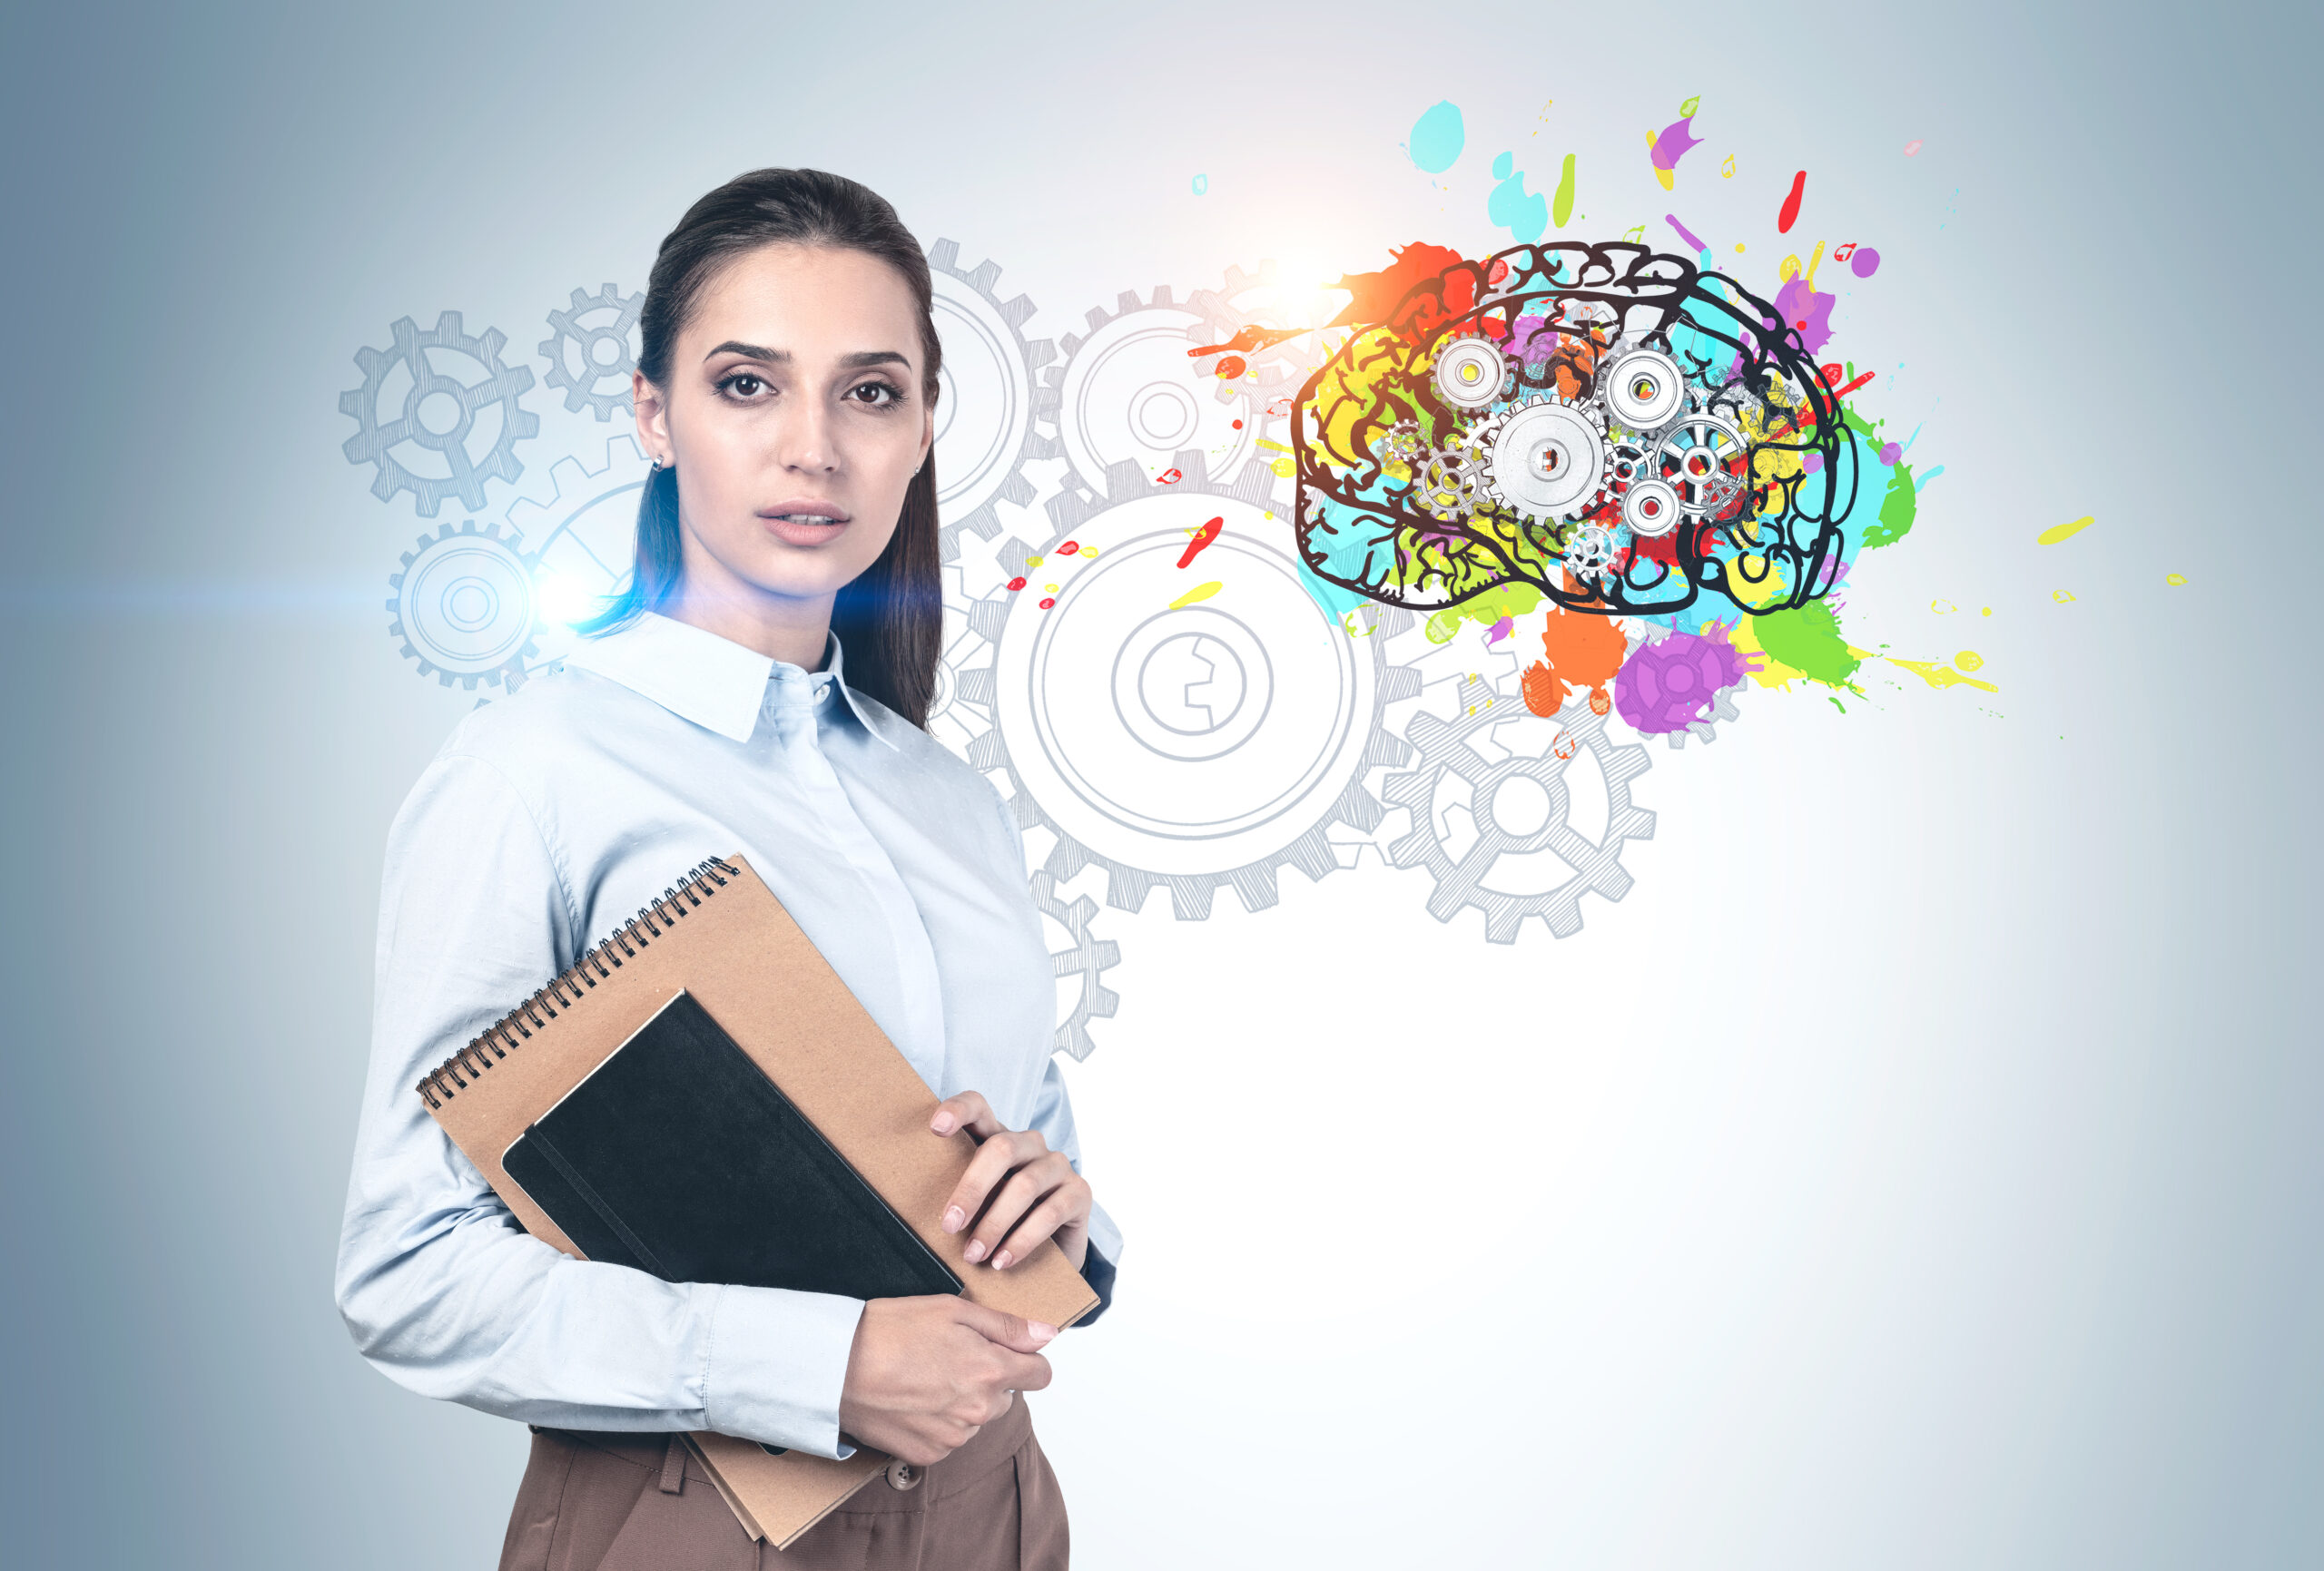 Serious young woman with dark hair and notebooks standing near concrete wall with colorful brain with gears drawn on it. Concept of brainstorming and education.